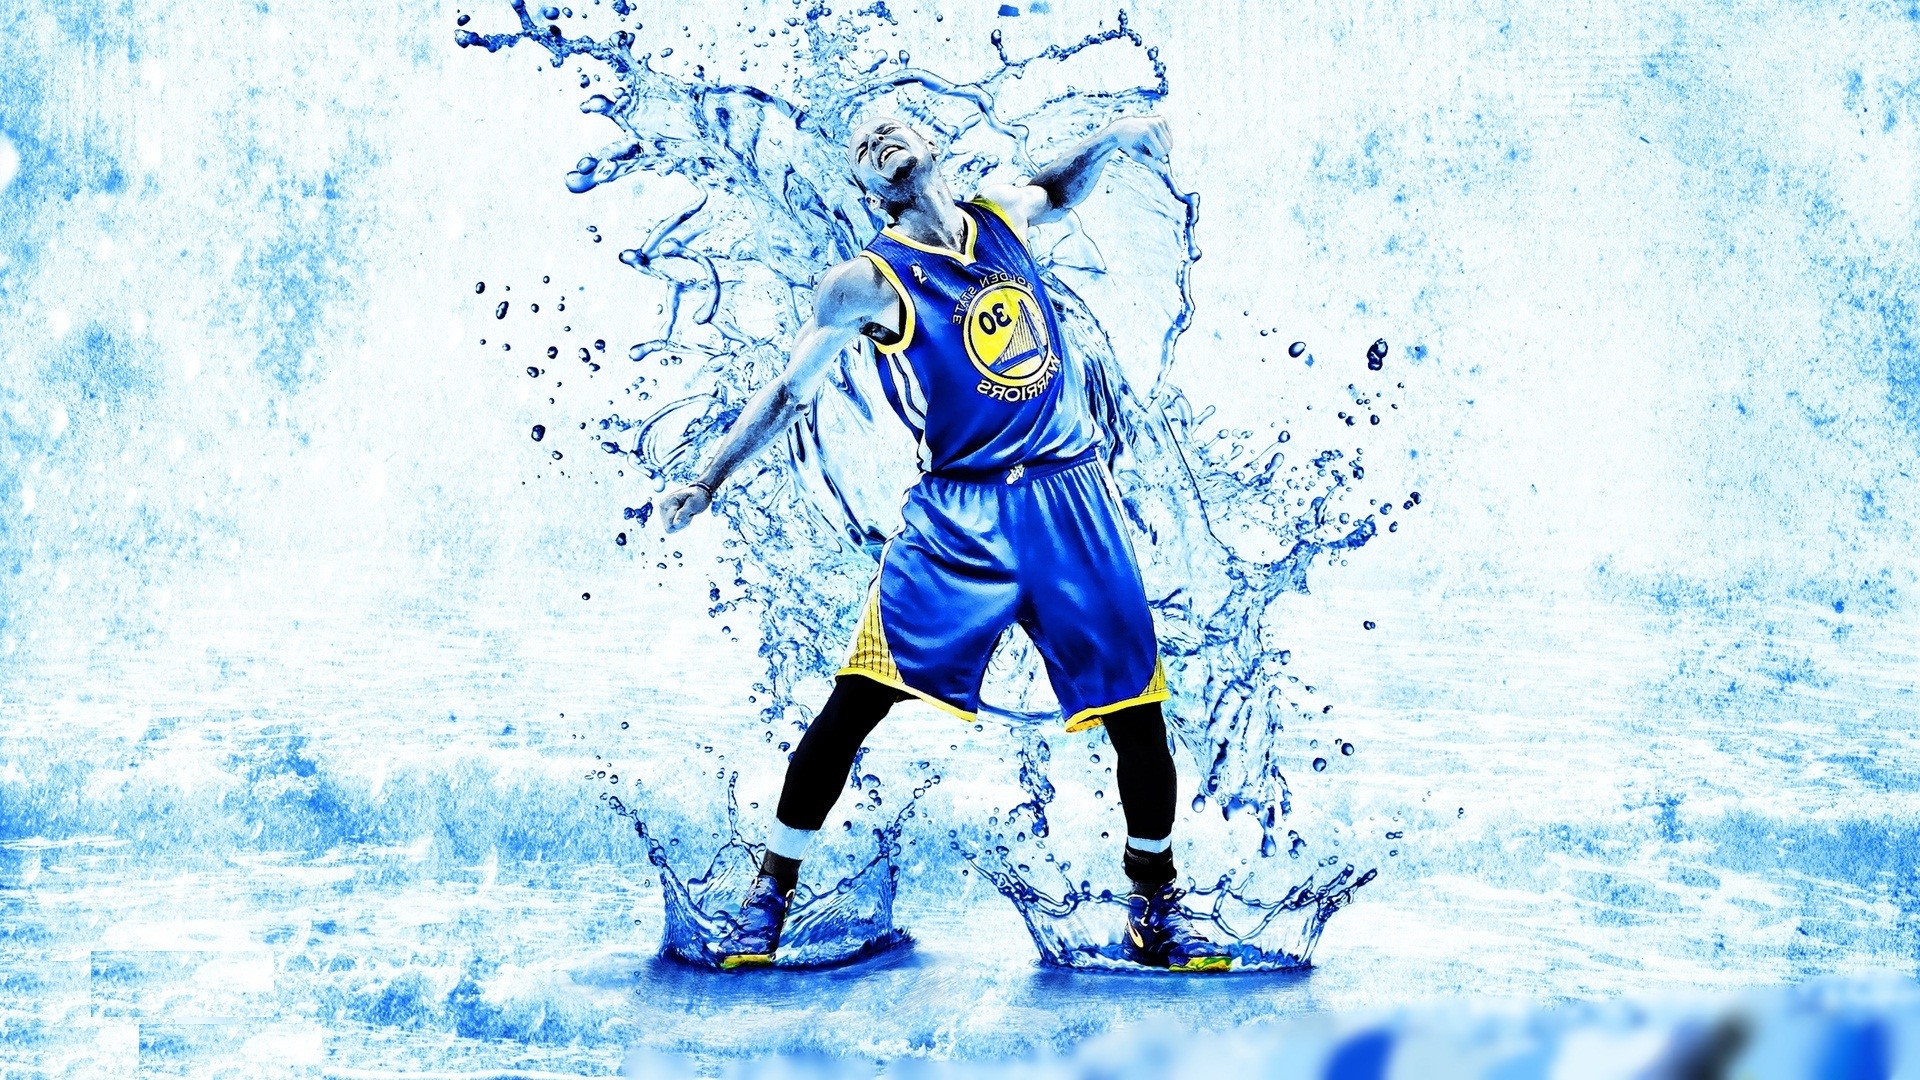 1920x1080 stephen curry wallpaper for facebook stephen curry wallpaper for laptop